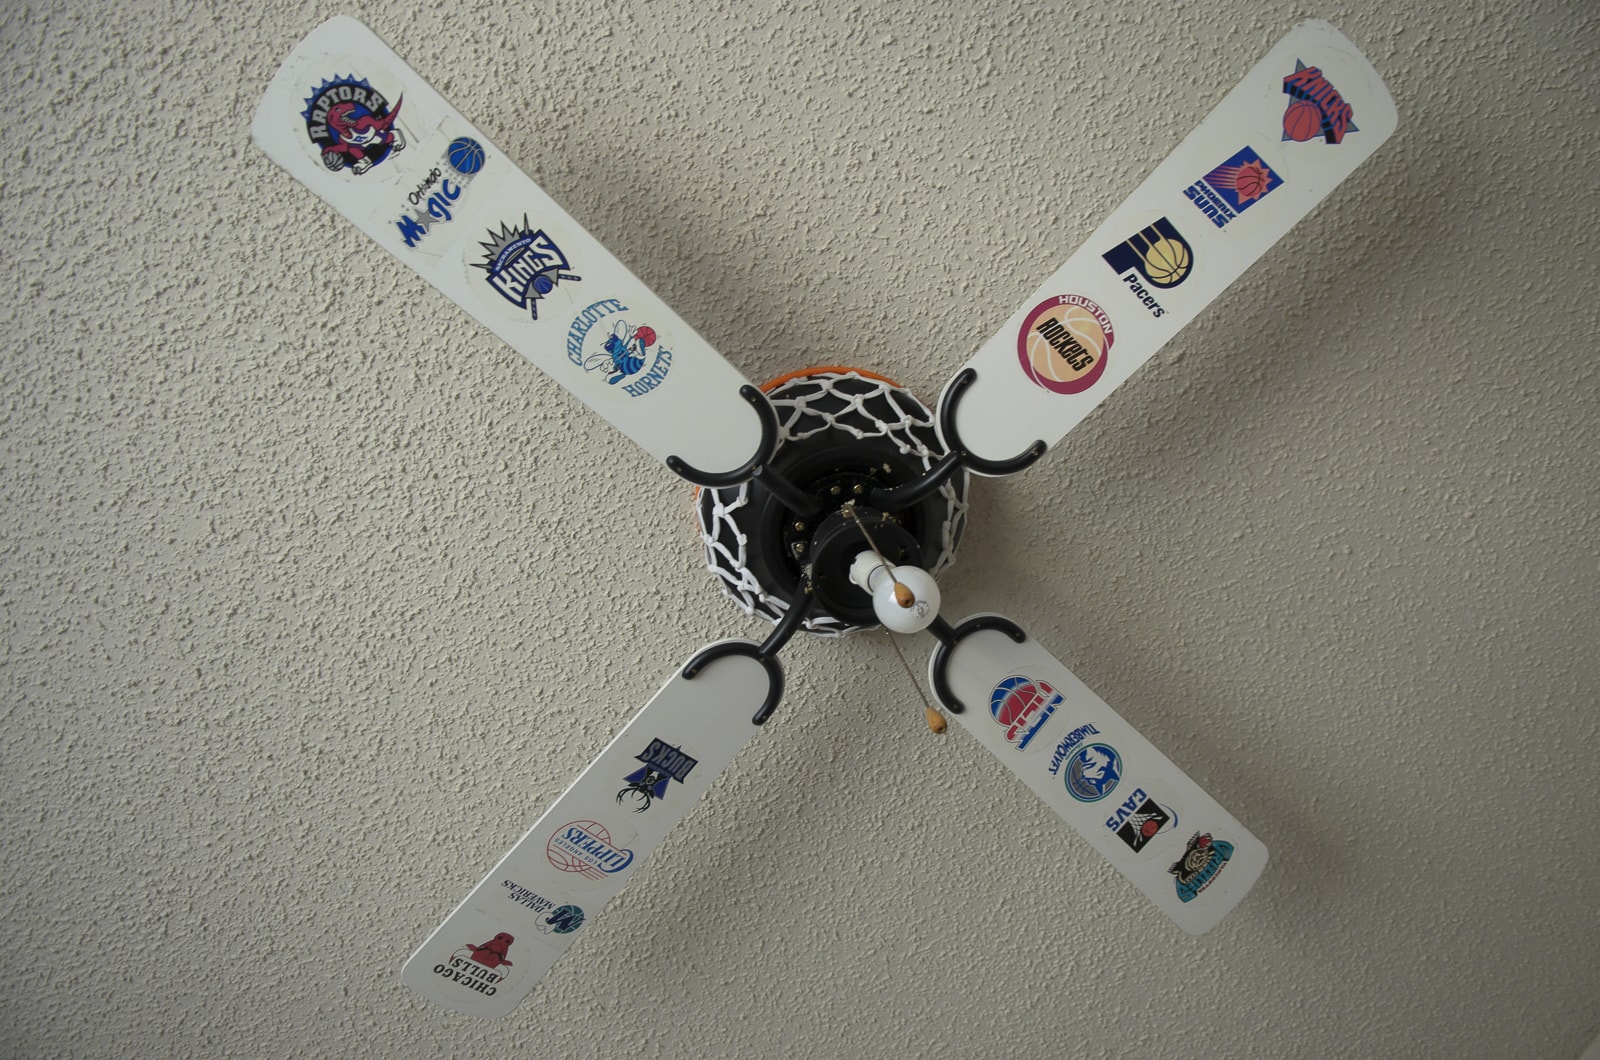 Sports themed ceiling fan at an abandoned house